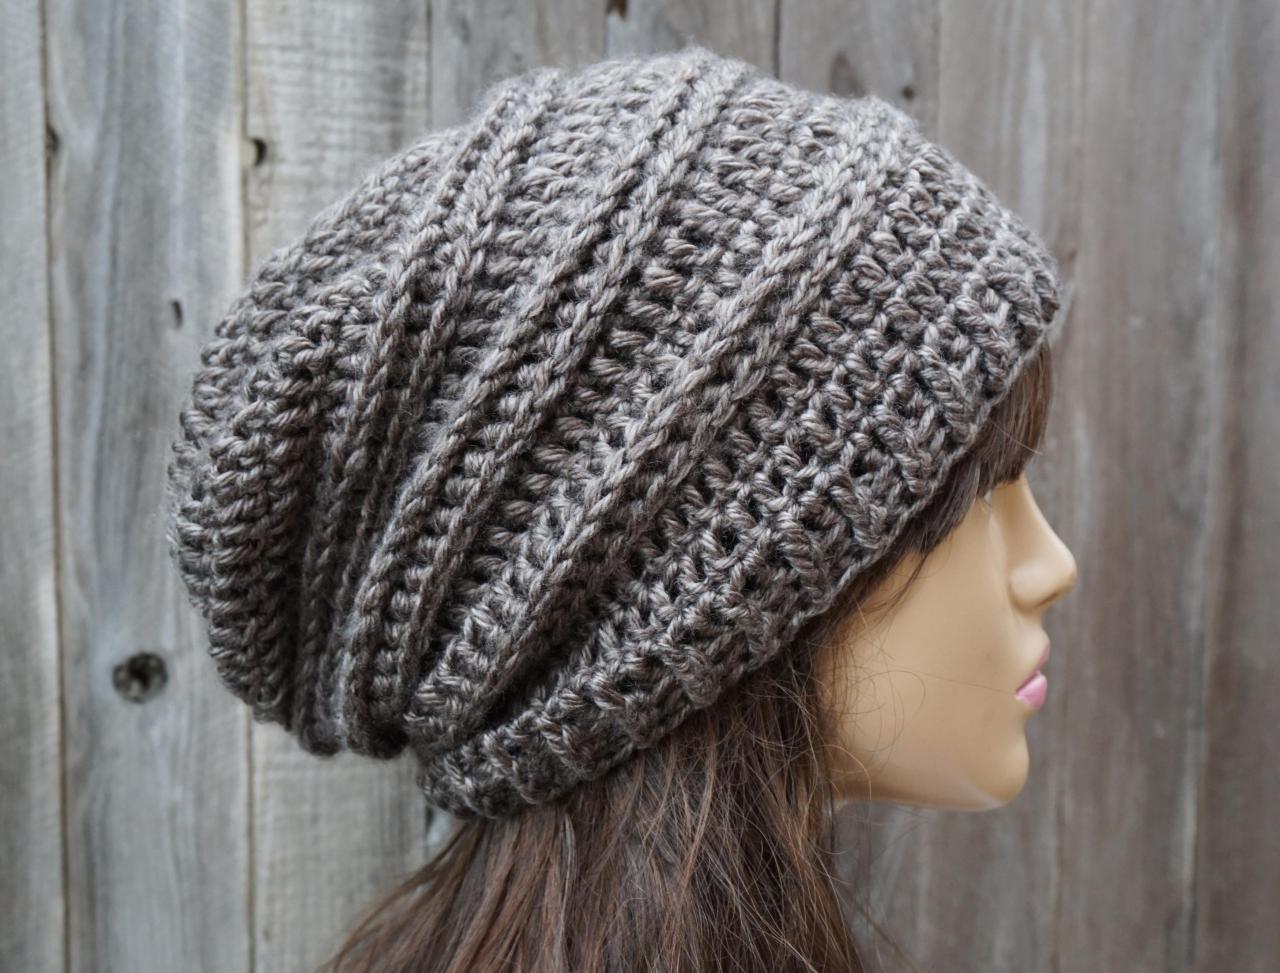 Crochet Hat - Slouchy Hat Winter Accessories Autumn Accessories Fall Fashion